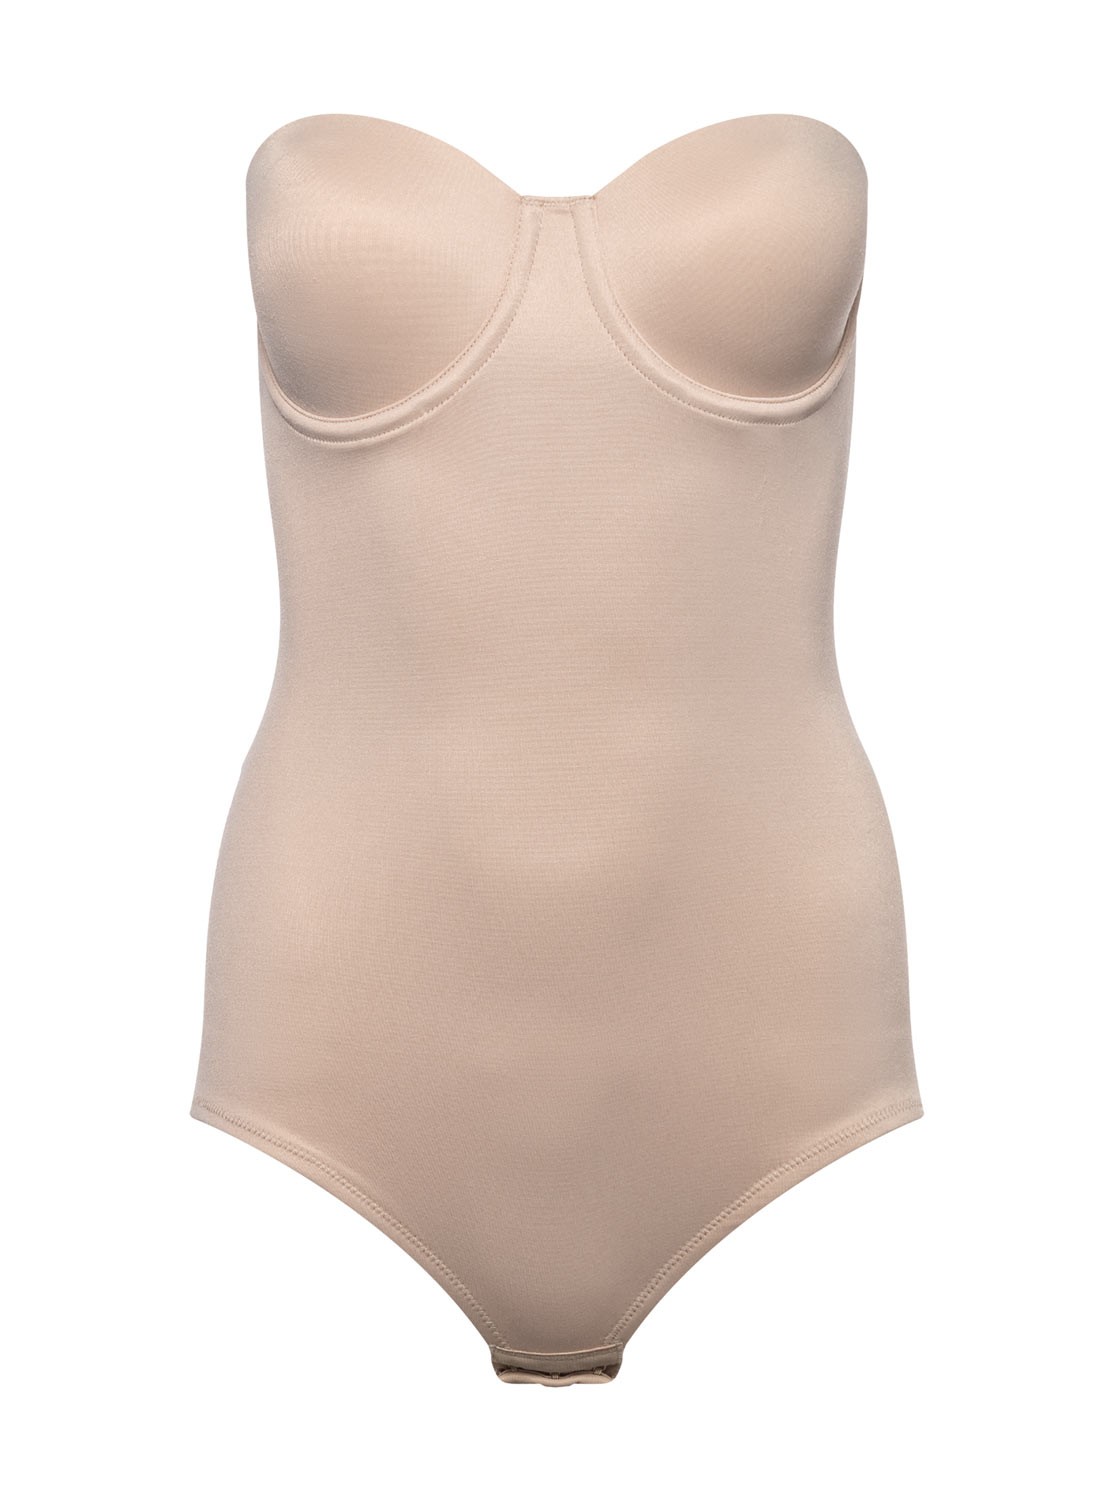 Body gainant forme bustier nude - Shape Away - Gainant extra-ferme